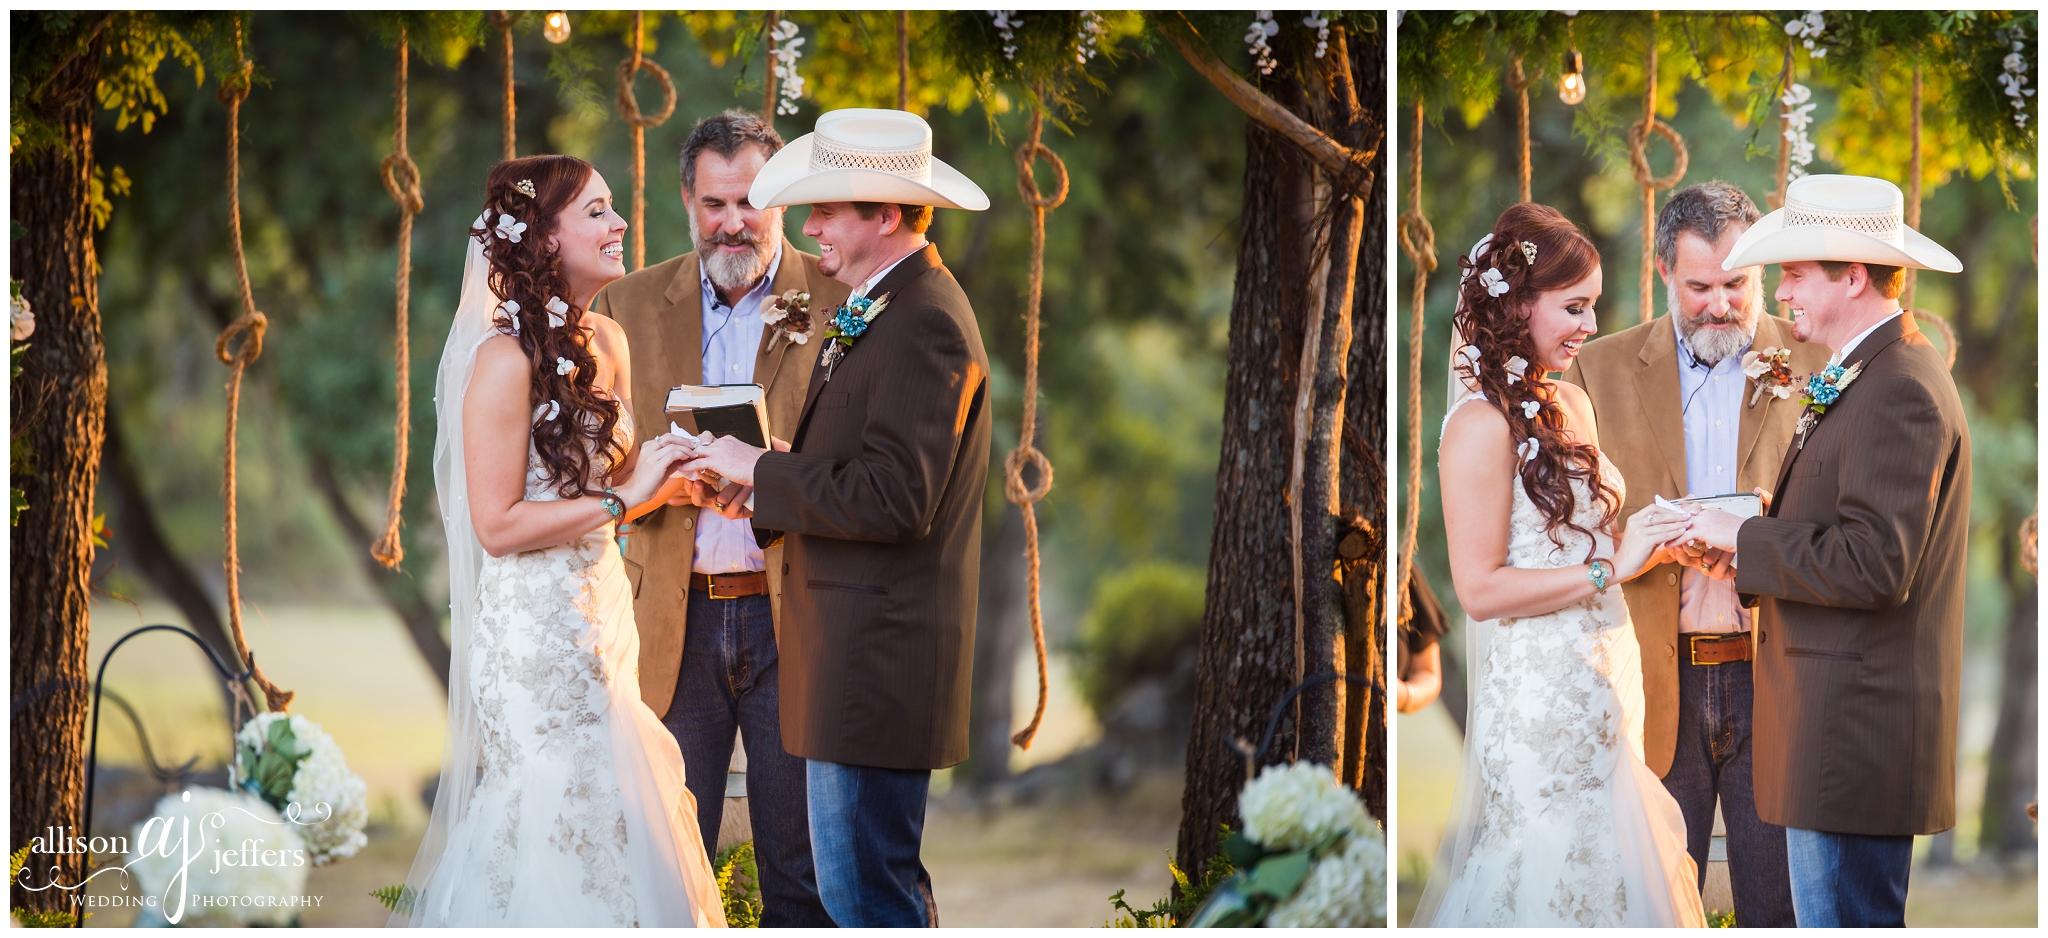 Boerne Wedding Photographer CW Hill Country Ranch Wedding Venue turquoise bronze brown wedding colors Fall Wedding 0068